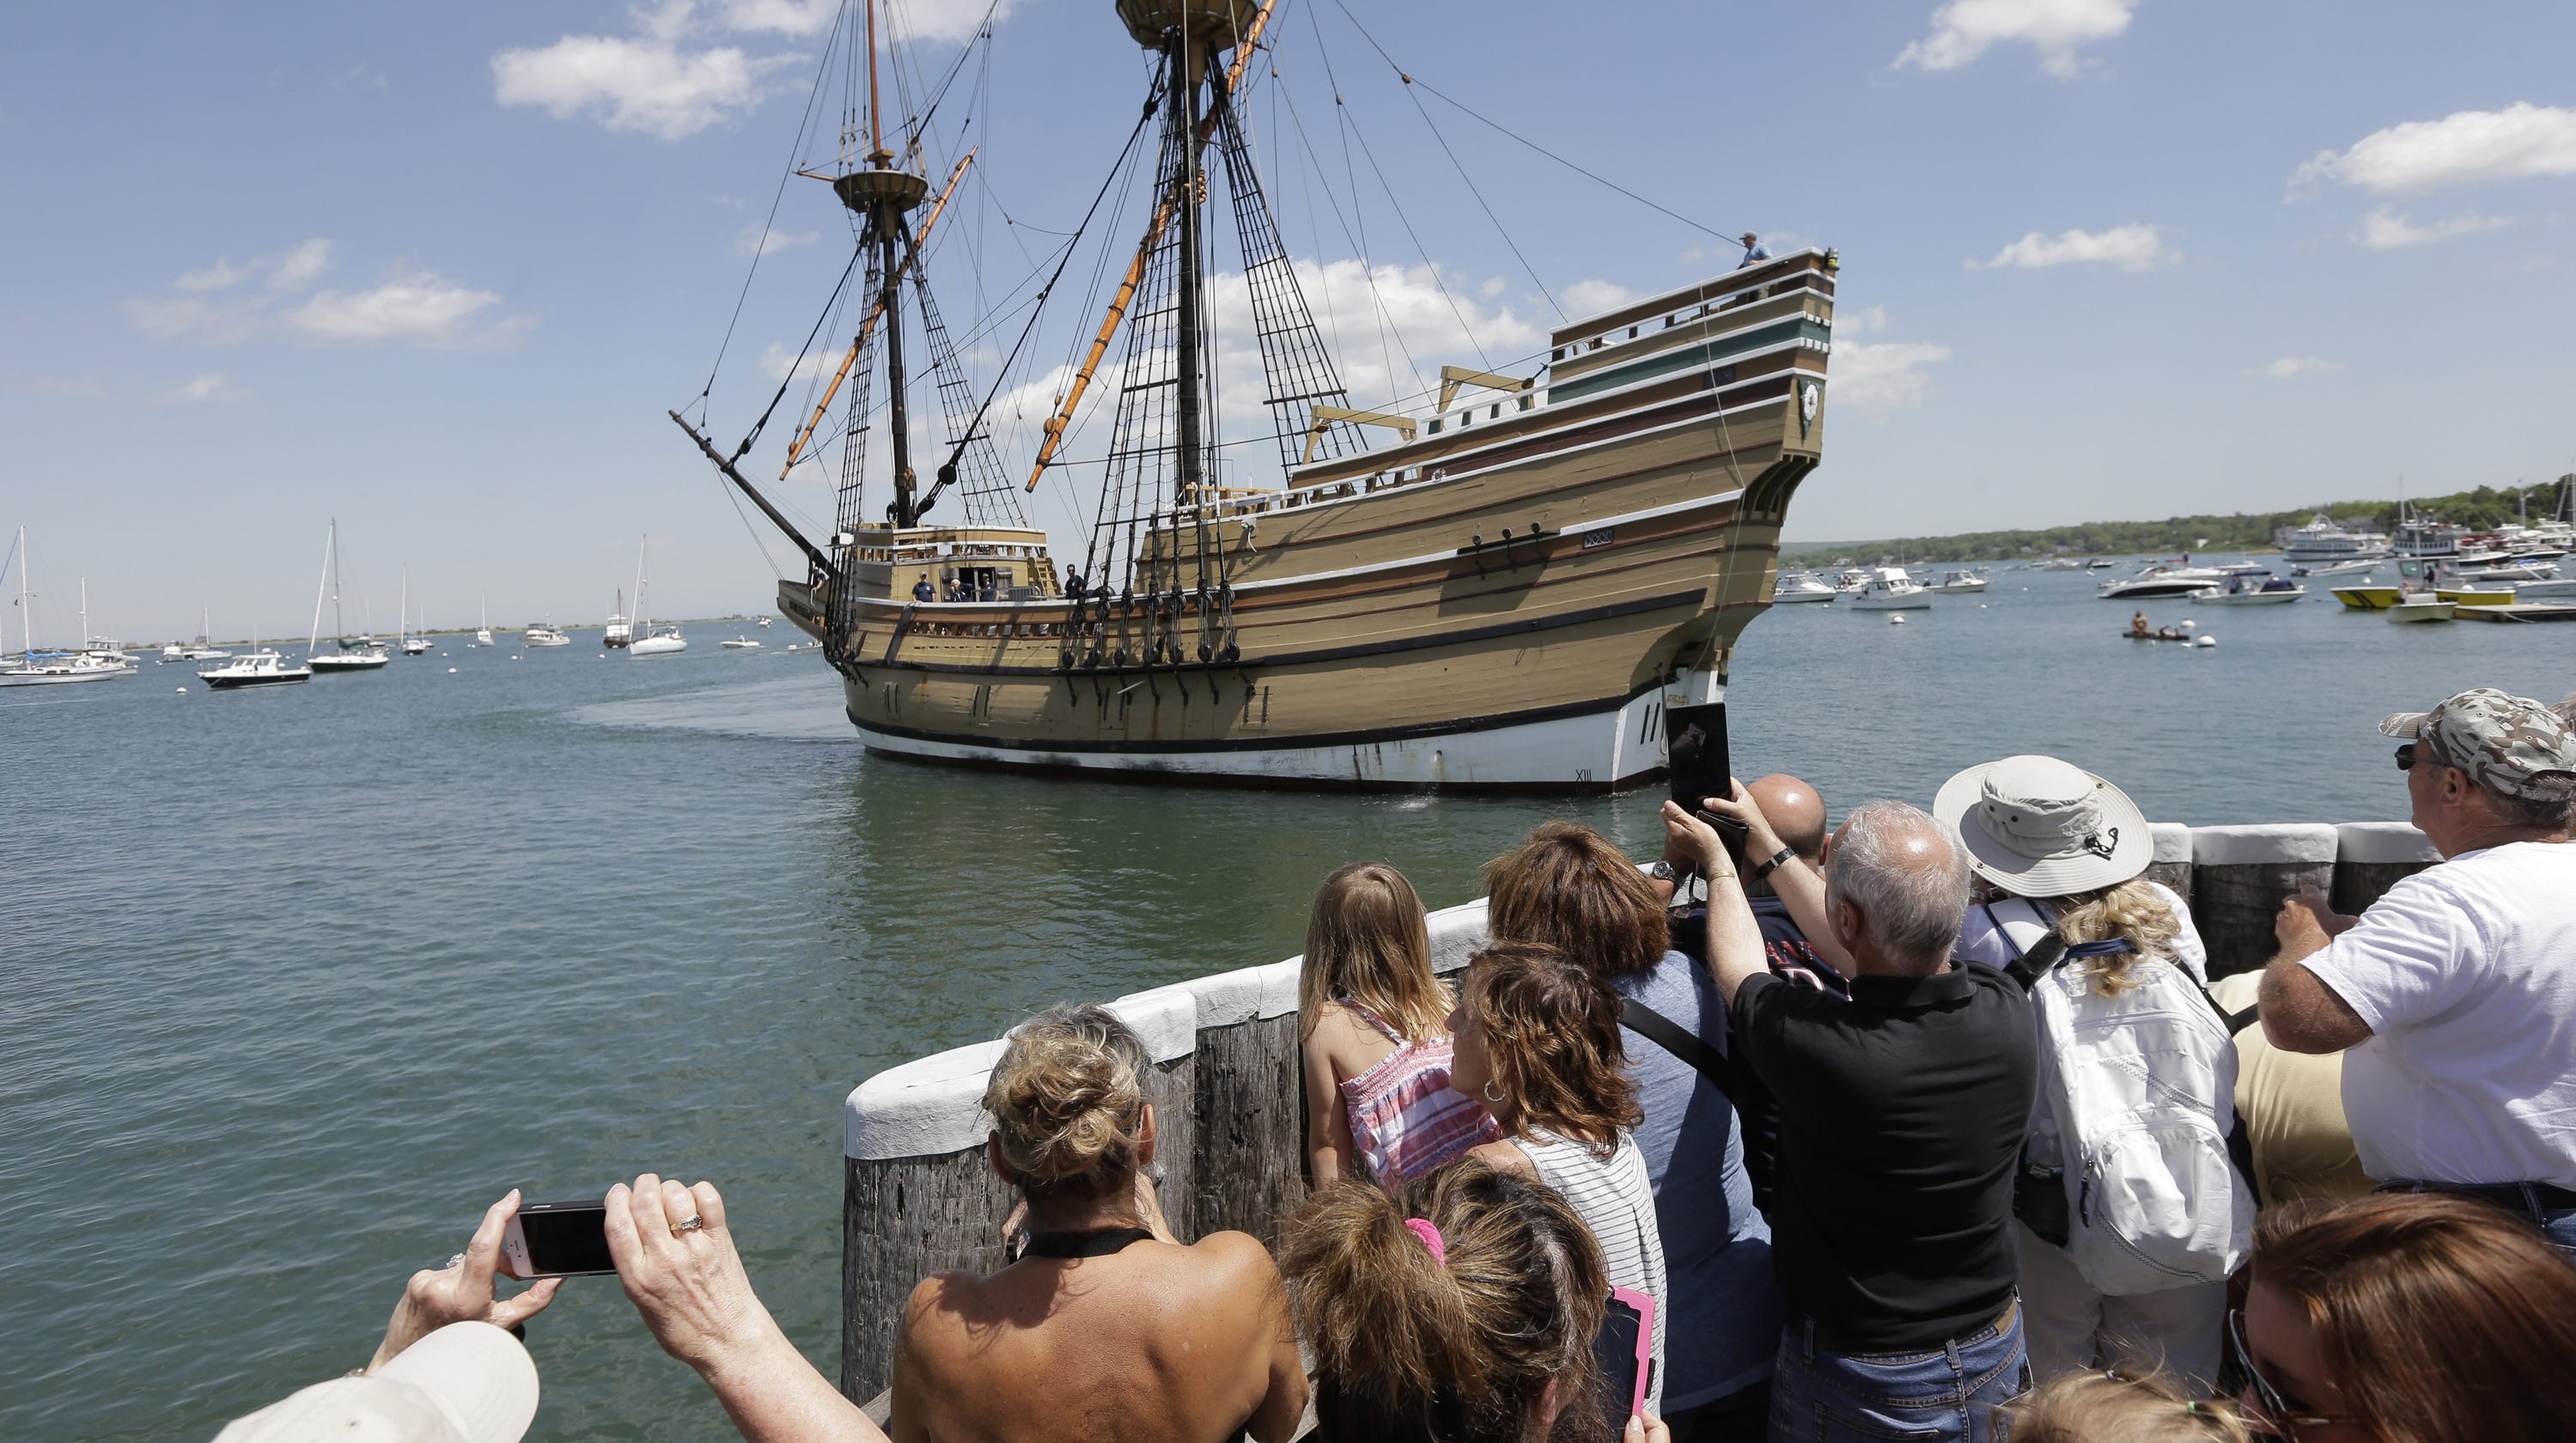 Mayflower II ready to sail home after $11.2 million in renovations